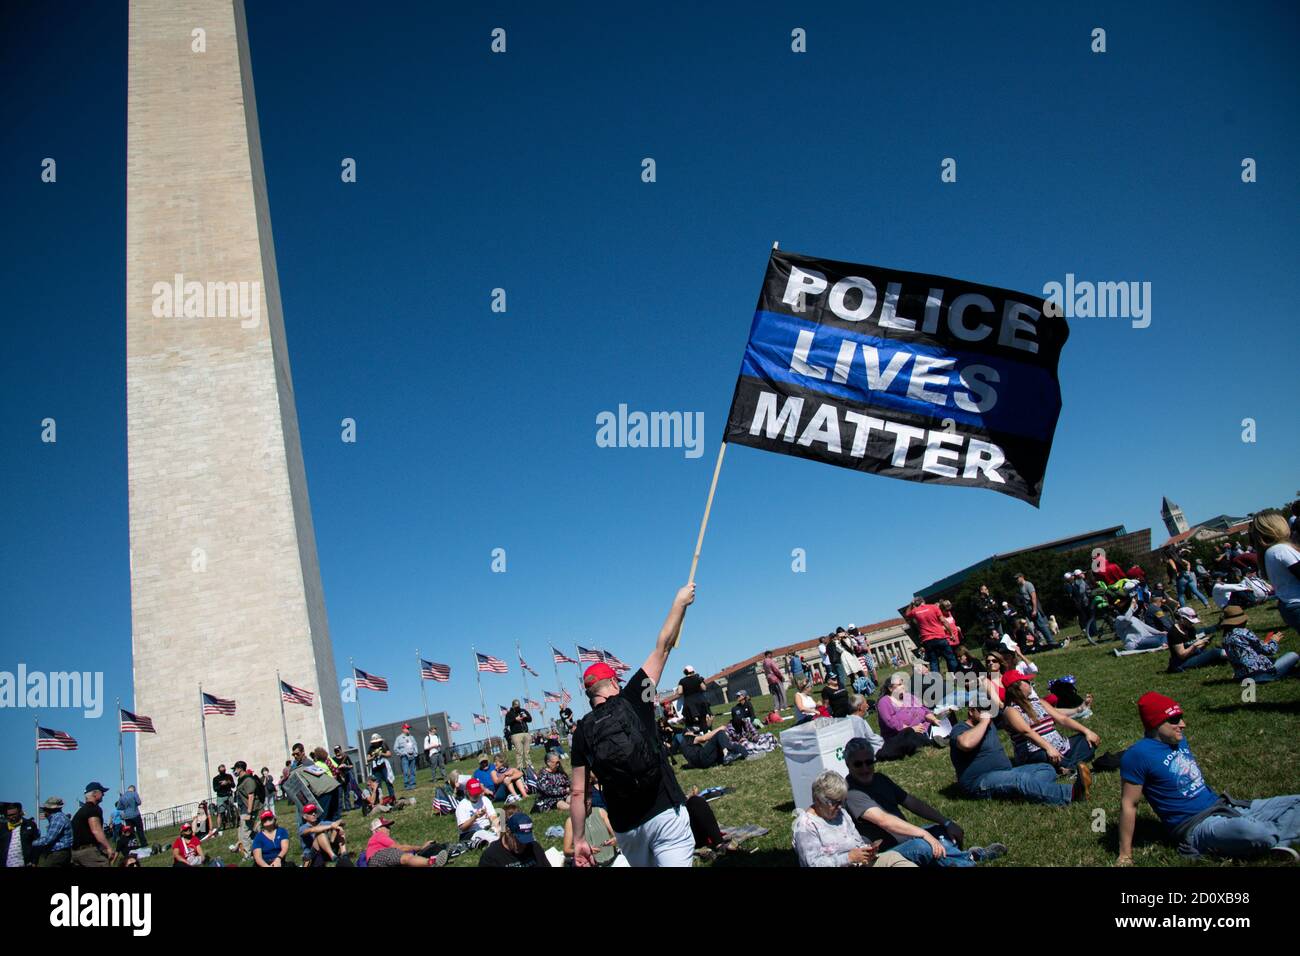 Washington, USA. 03rd Oct, 2020. A protester carries a Police Lives Matter flag near the Washington Monument, as part of the Unsilent March, in Washington, DC, on October 3, 2020, amid the coronavirus pandemic. The day after President Donald Trump's admittance to Walter Reed National Military Medical Center after contracting COVID-19, hundreds marched in support of the Walk Away movement and shared stories of leaving the Democratic Party. (Graeme Sloan/Sipa USA) Credit: Sipa USA/Alamy Live News Stock Photo